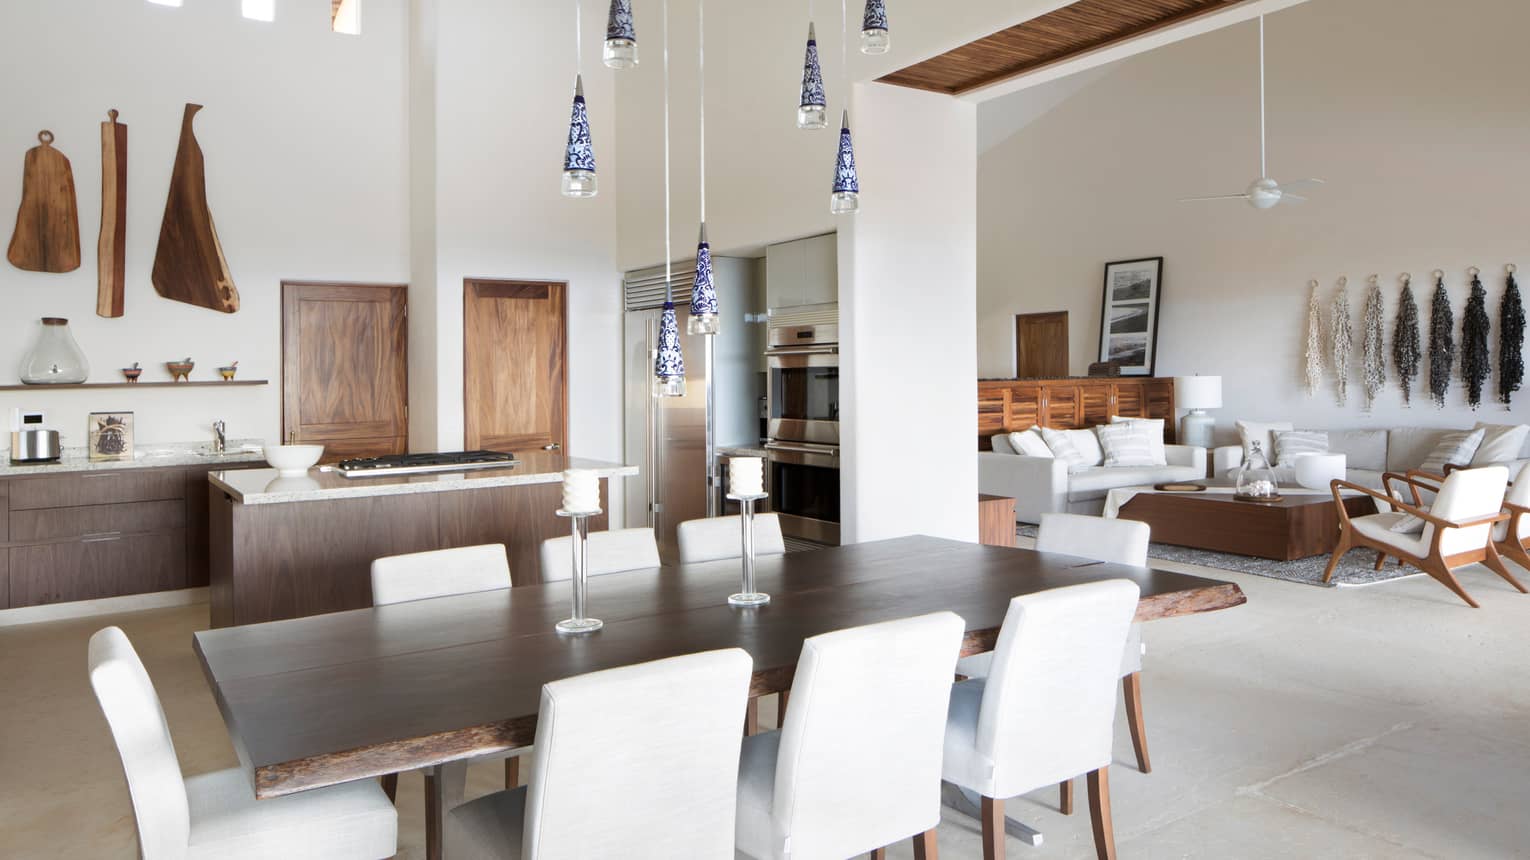 White dining chairs around long wood table under glass lights, modern kitchen